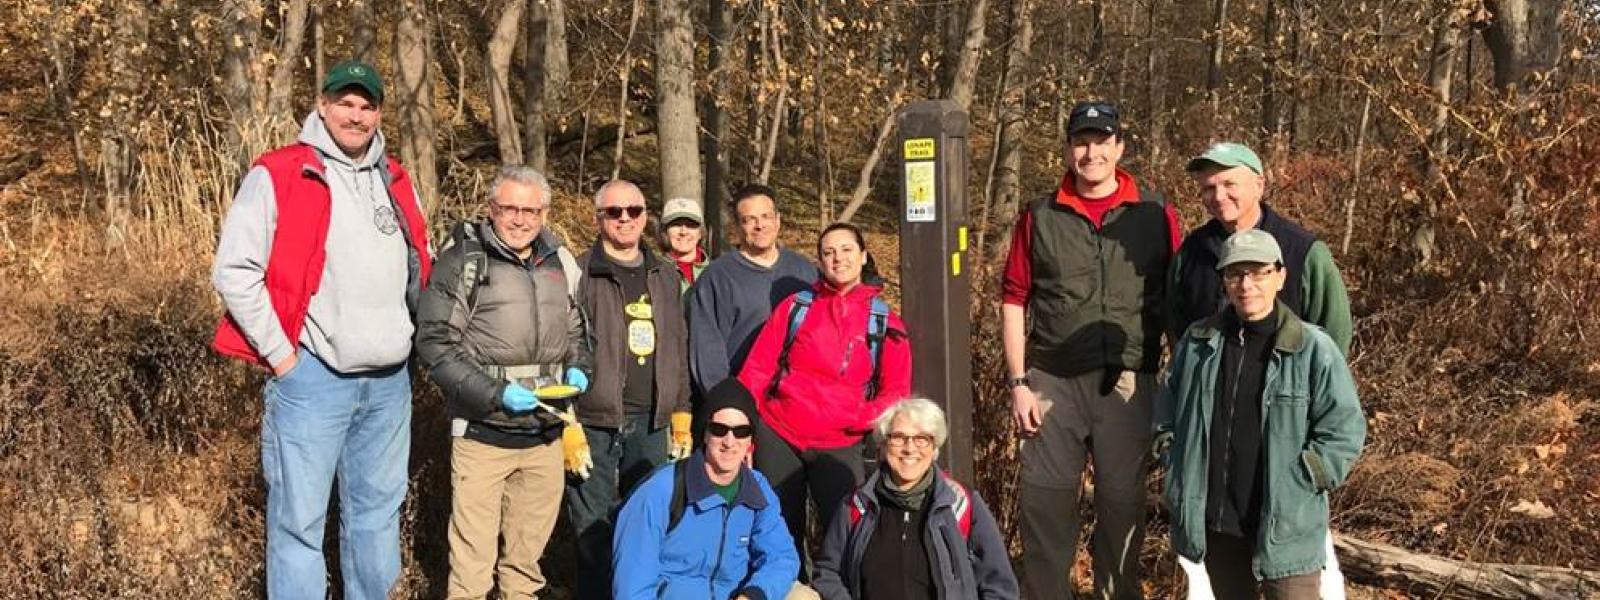 Proud volunteers pose by a new Lenape Trail sign bollard.